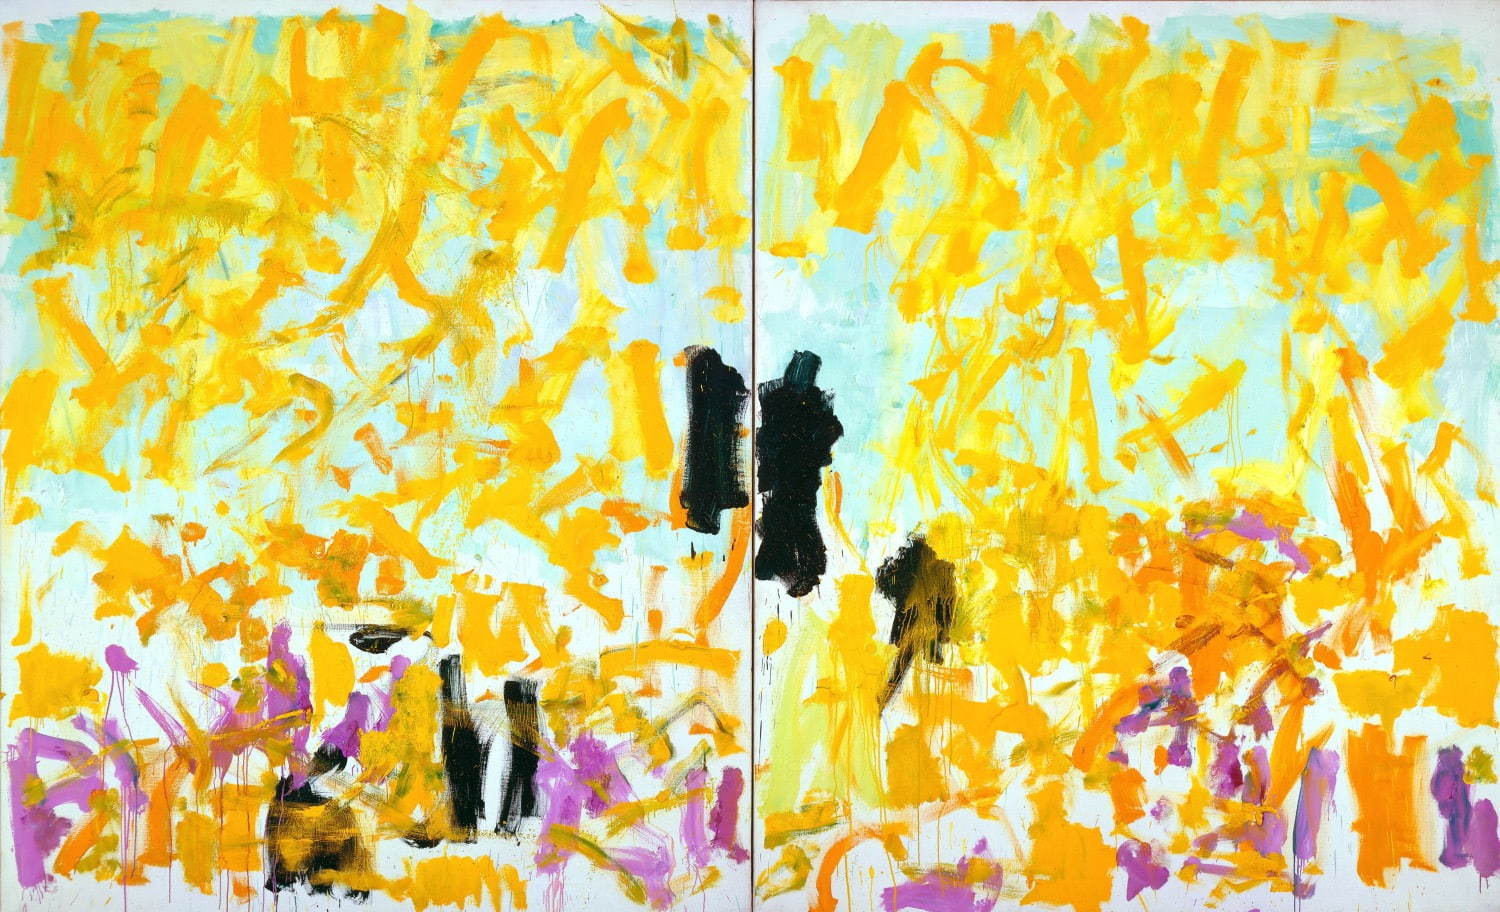 Joan Mitchell, <em width="1500" height="912">Cypress</em>, 1980
Oil on canvas (diptych), 220.3 × 360.7cm
Courtesy of the Fondation Louis Vuitton